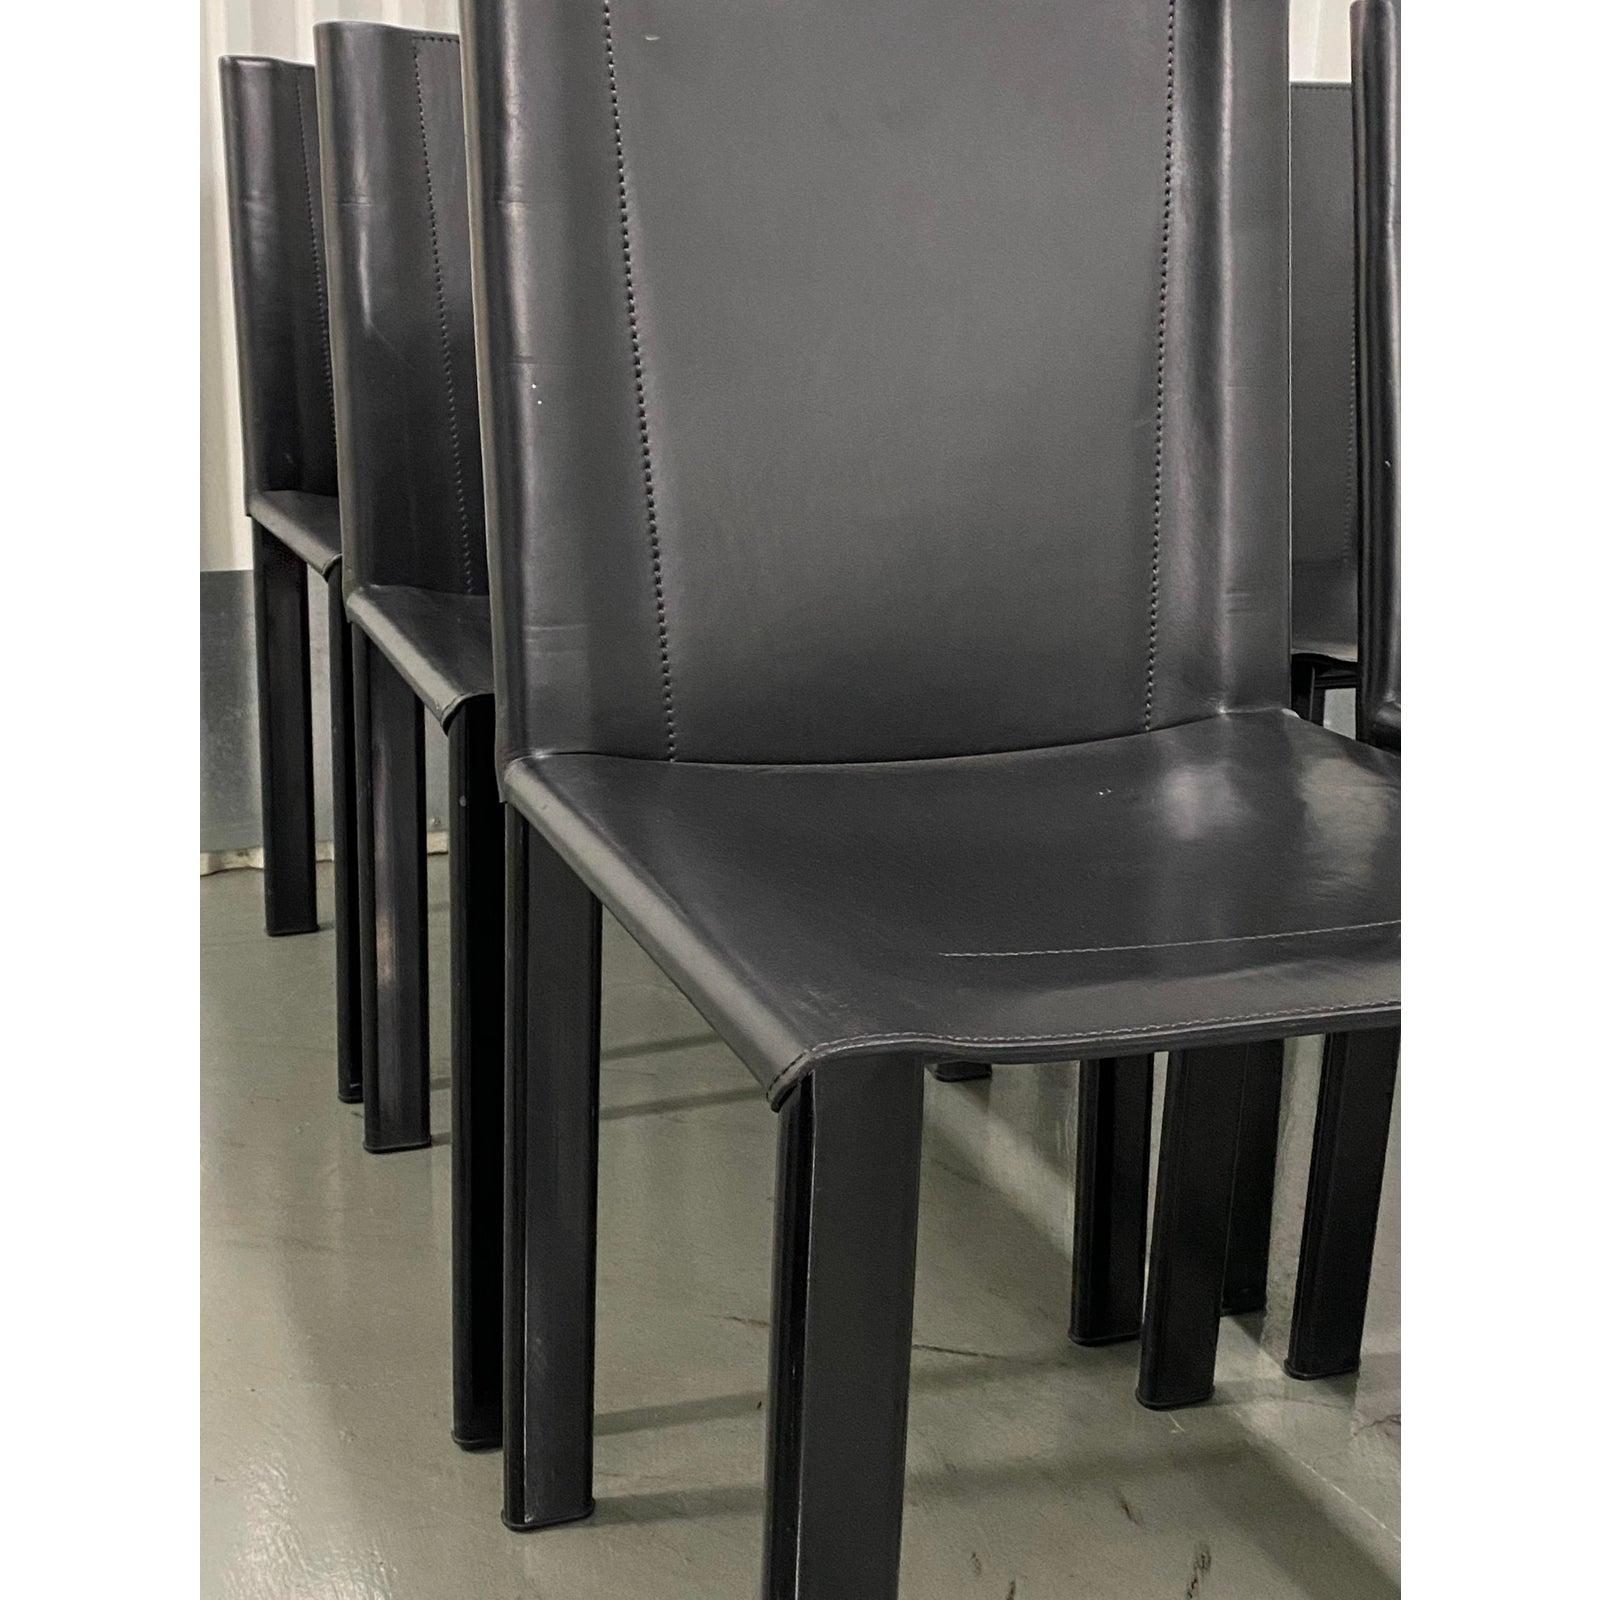 Set of six Matteo Grassi modernist black leather dining chairs

Each chair measures: 17.5